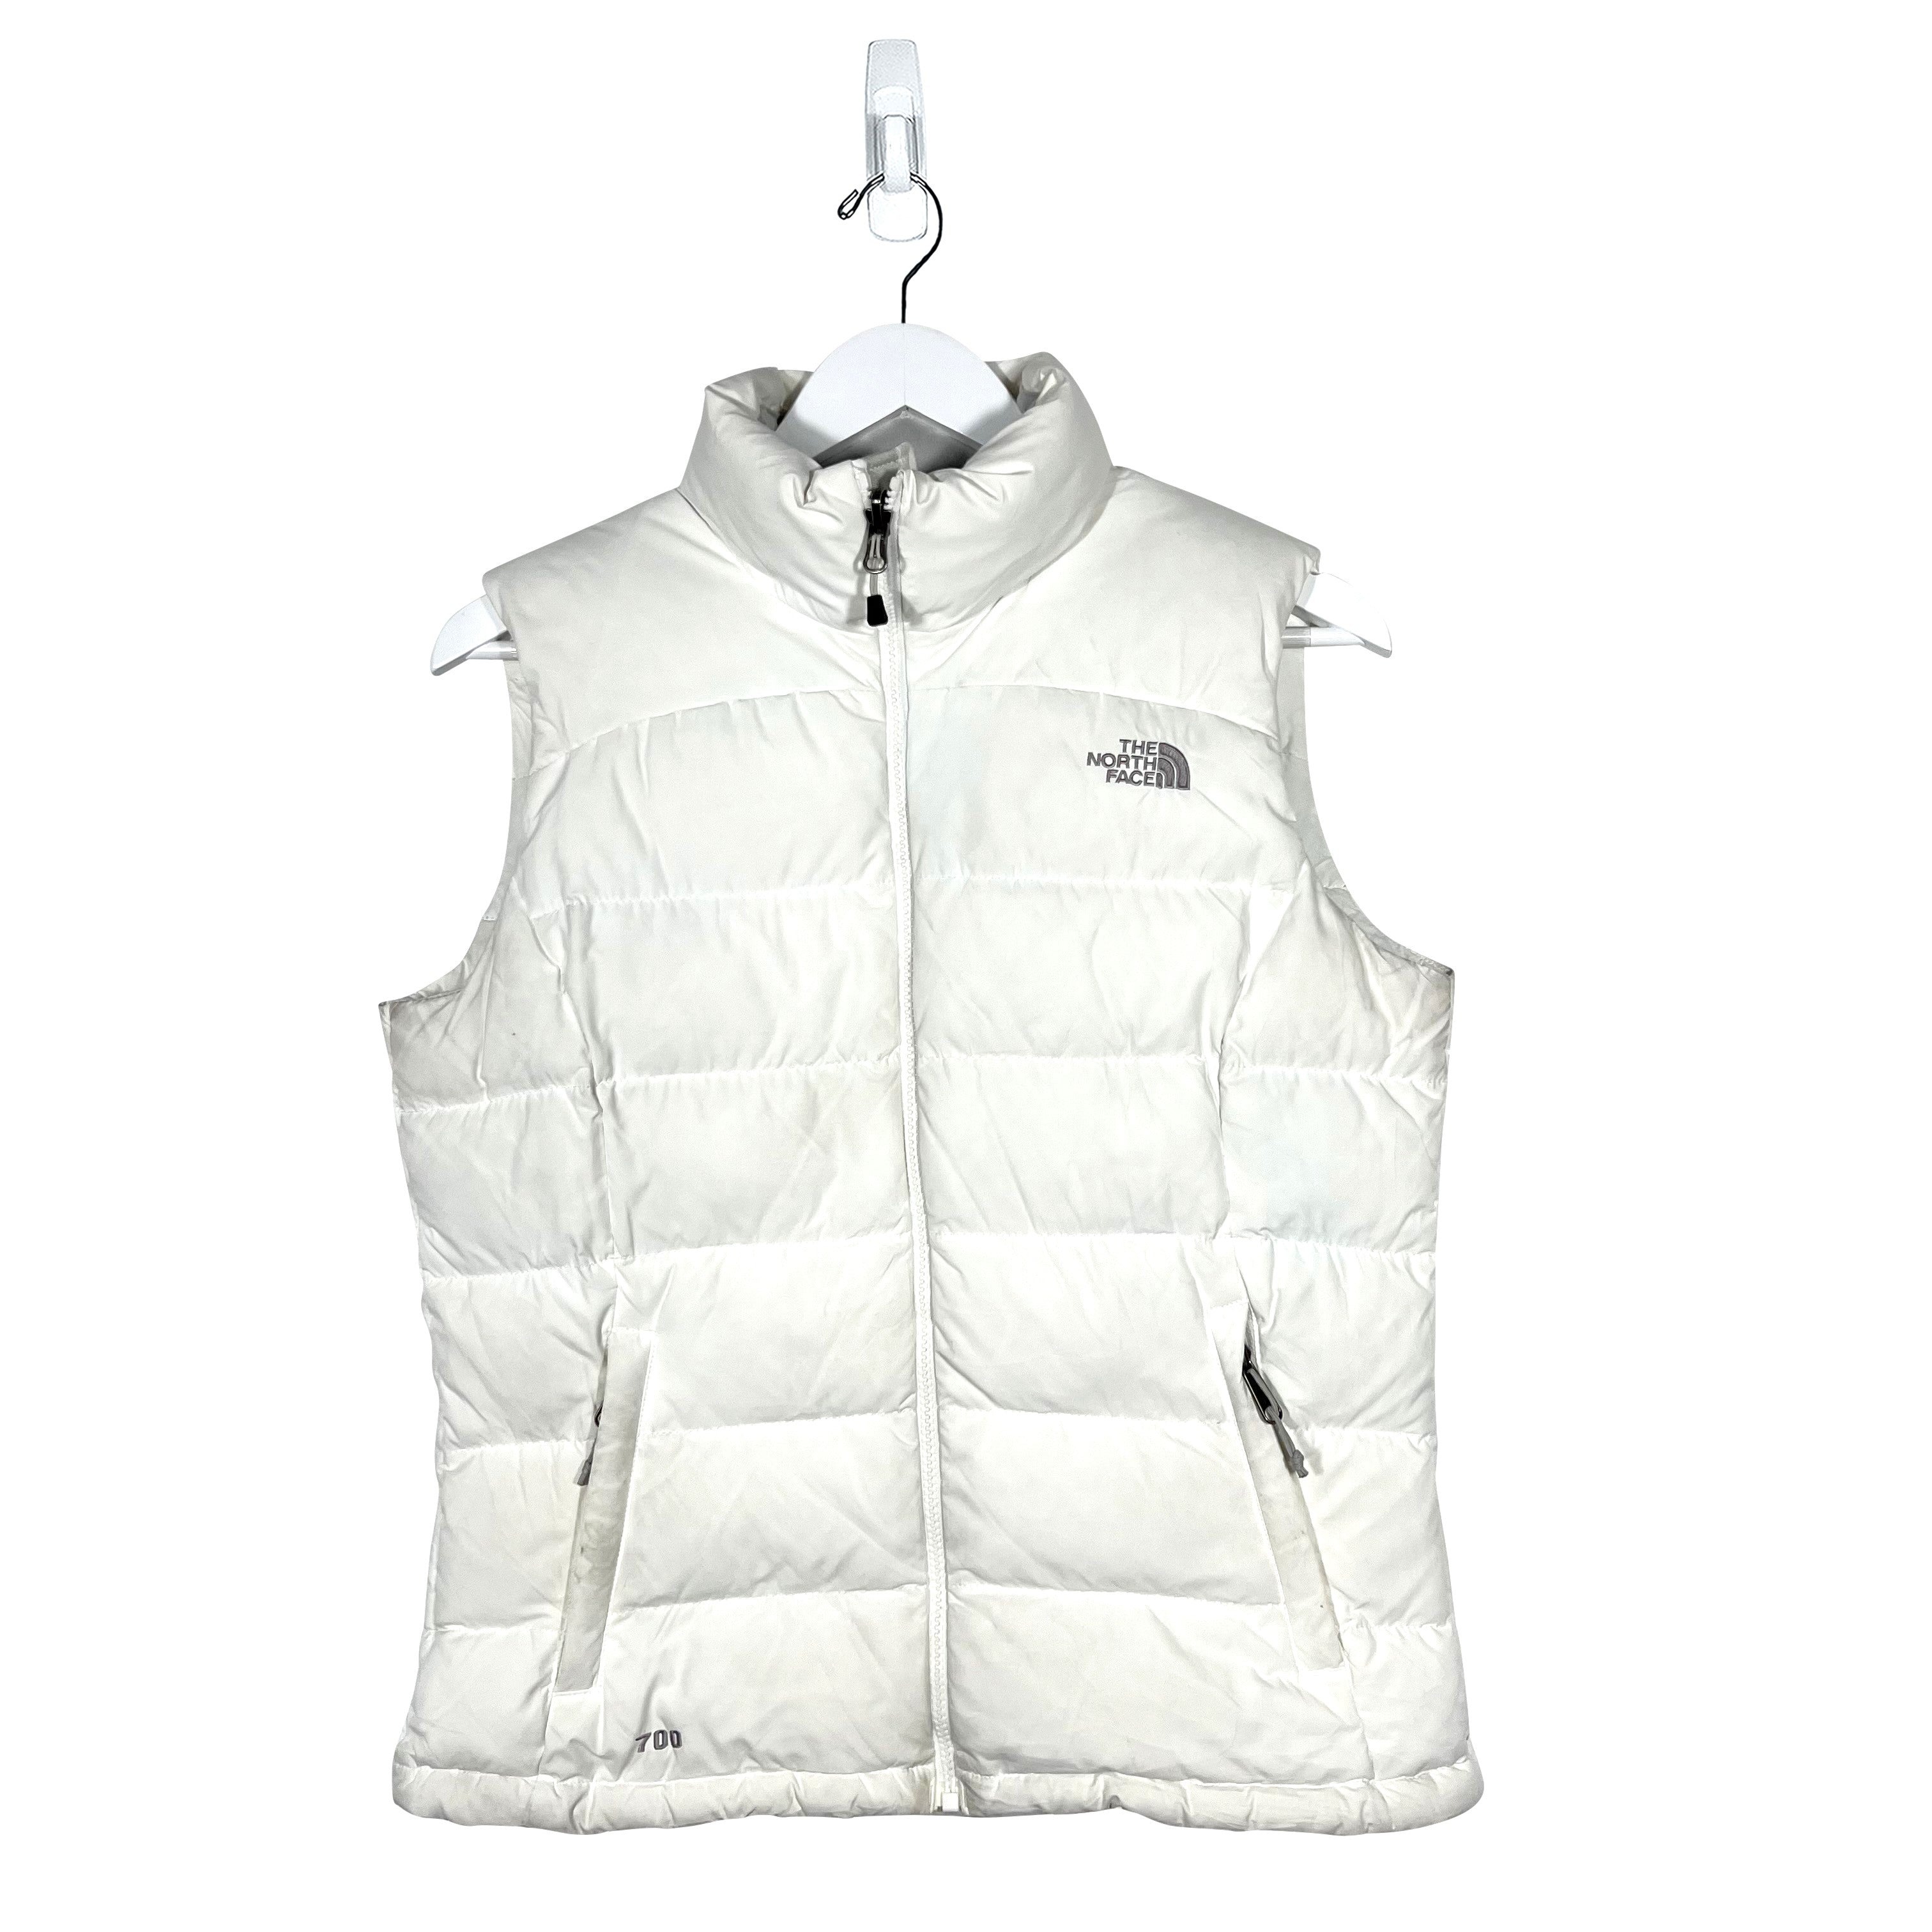 Vintage The North Face 700 Series Insulated Vest - Women's Medium